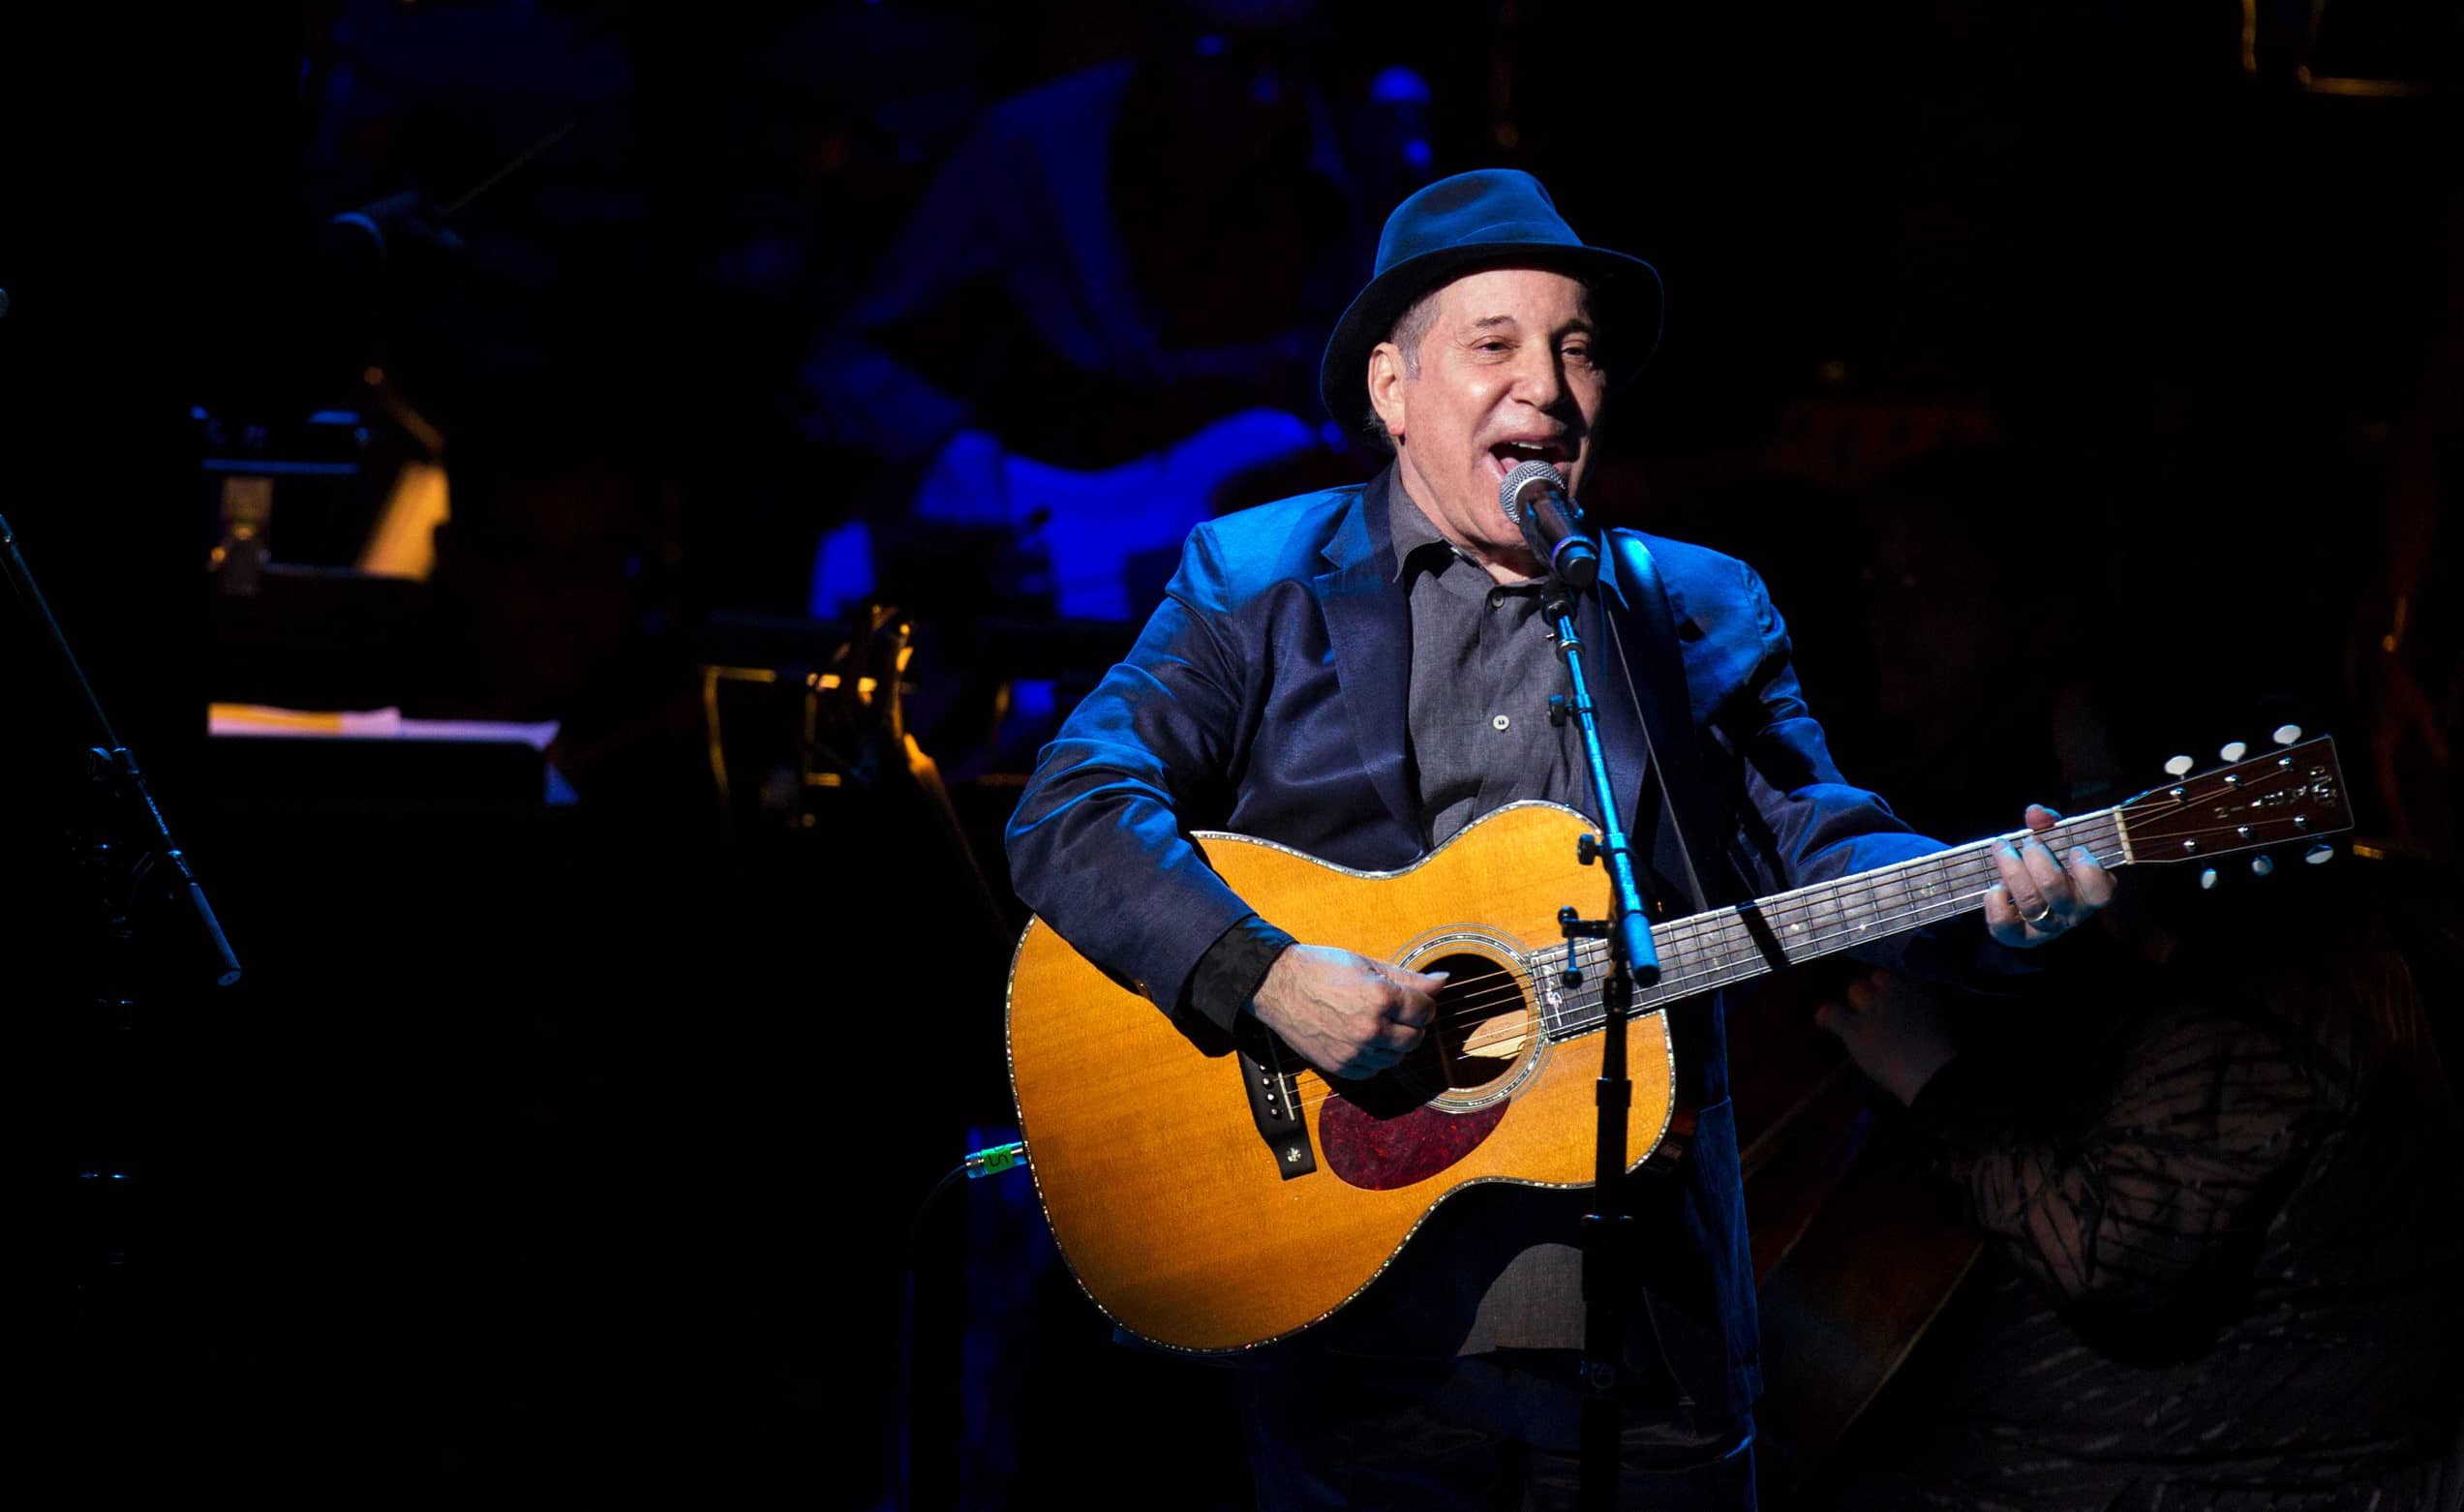 singer-paul-simon-performs-with-sting-during-the-rainforest-funds-25th-anniversary-benefit-concert-in-new-york